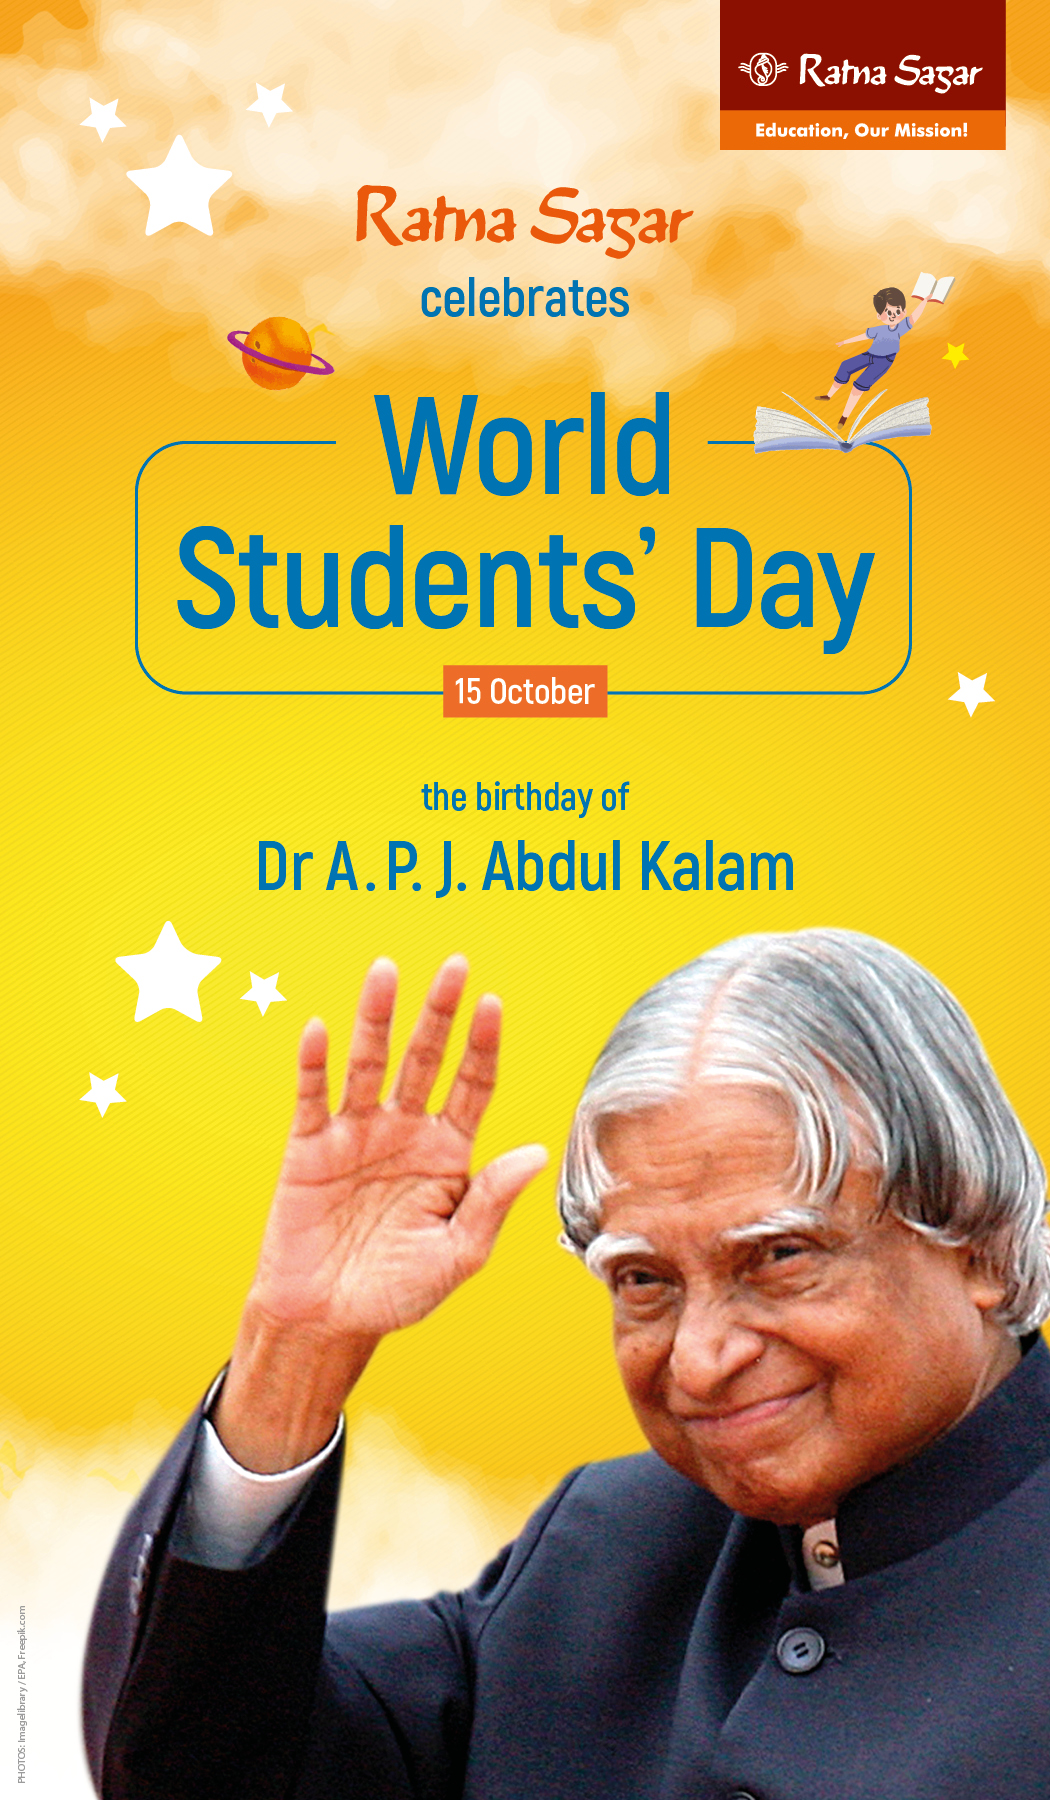 World Students' Day!